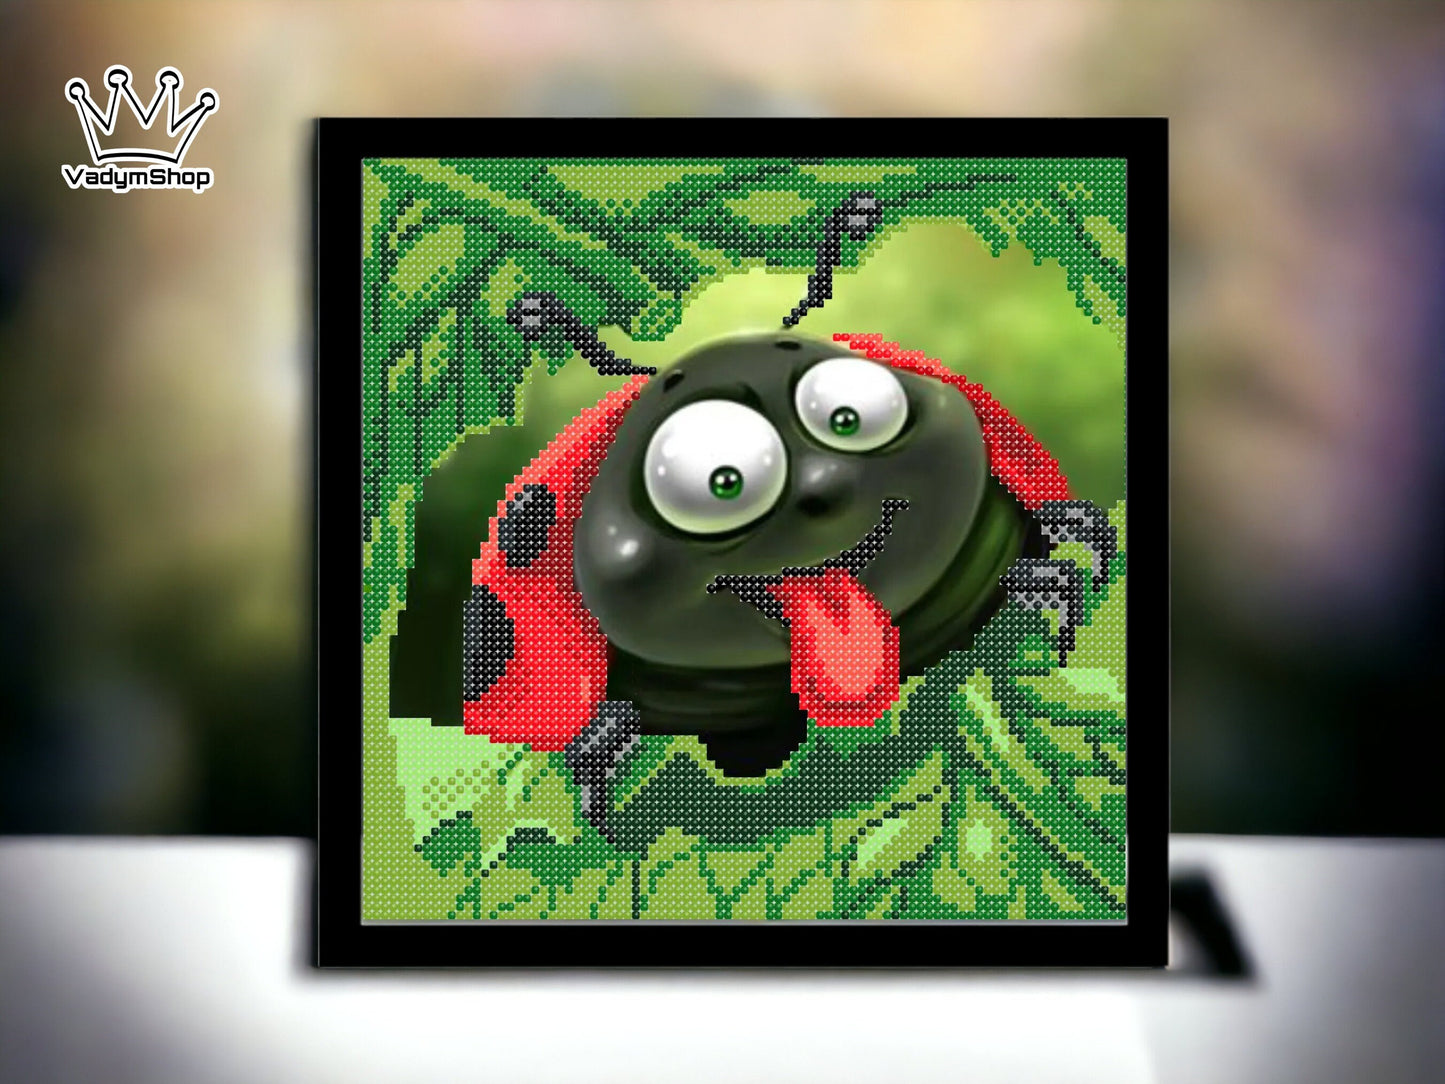 DIY Bead embroidery kit "Ladybird''. Size: 7.9-7.9 in (20-20cm) - VadymShop